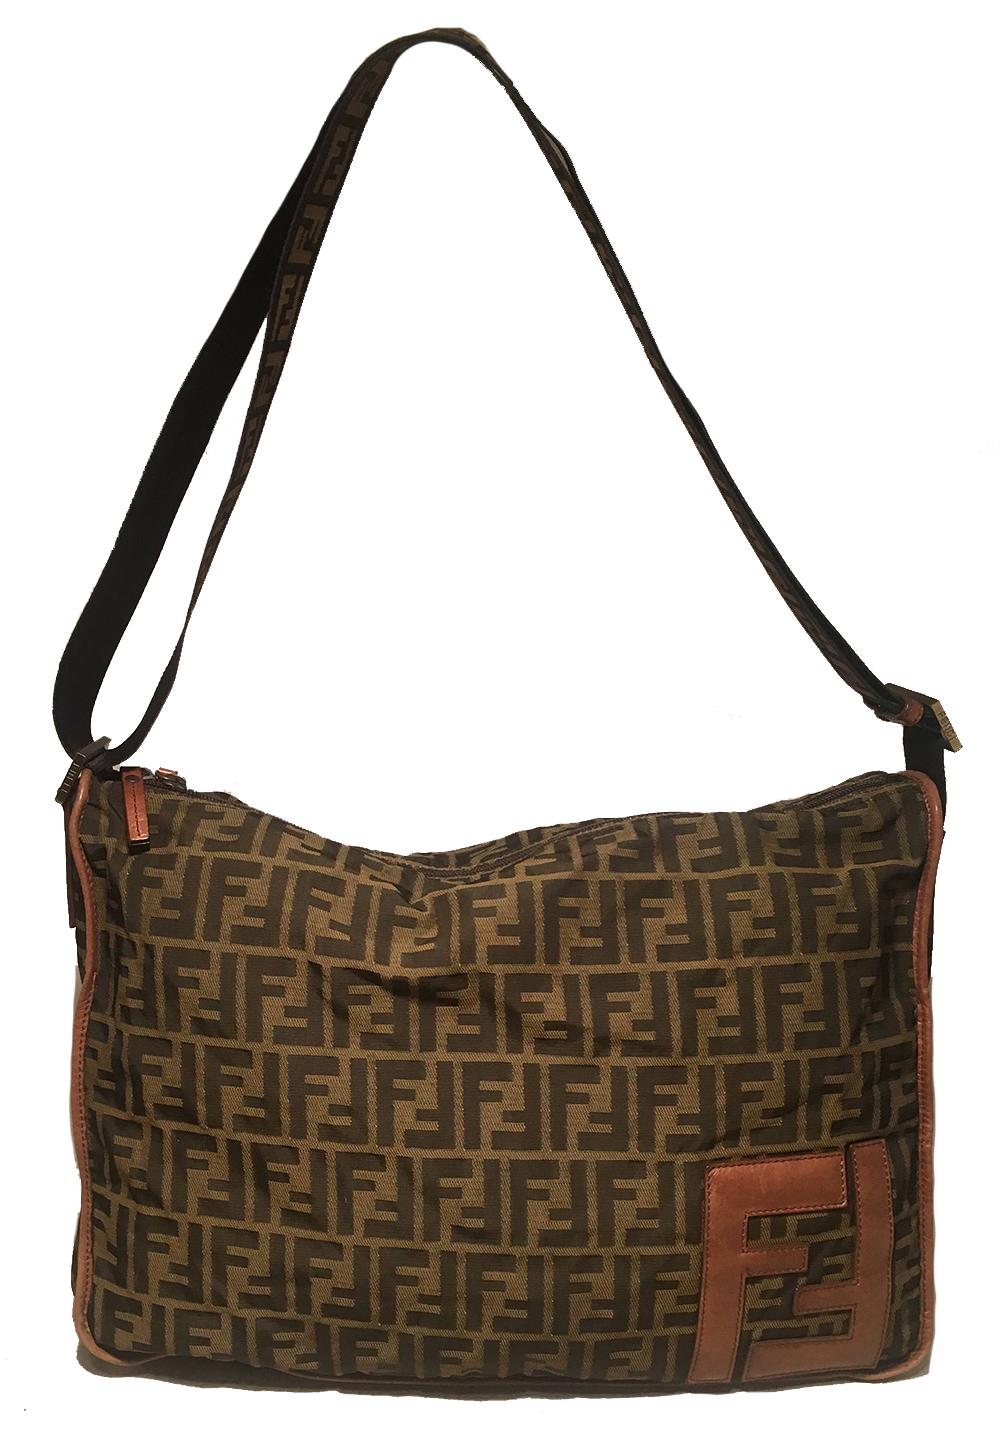 Fendi Zucca Monogram Messenger Bag in excellent condition. Signature zucca print monogram canvas exterior trimmed with brown leather. Woven nylon zucca monogram adjustable shoulder strap. Top double zipper closure opens to a dark grey woven nylon